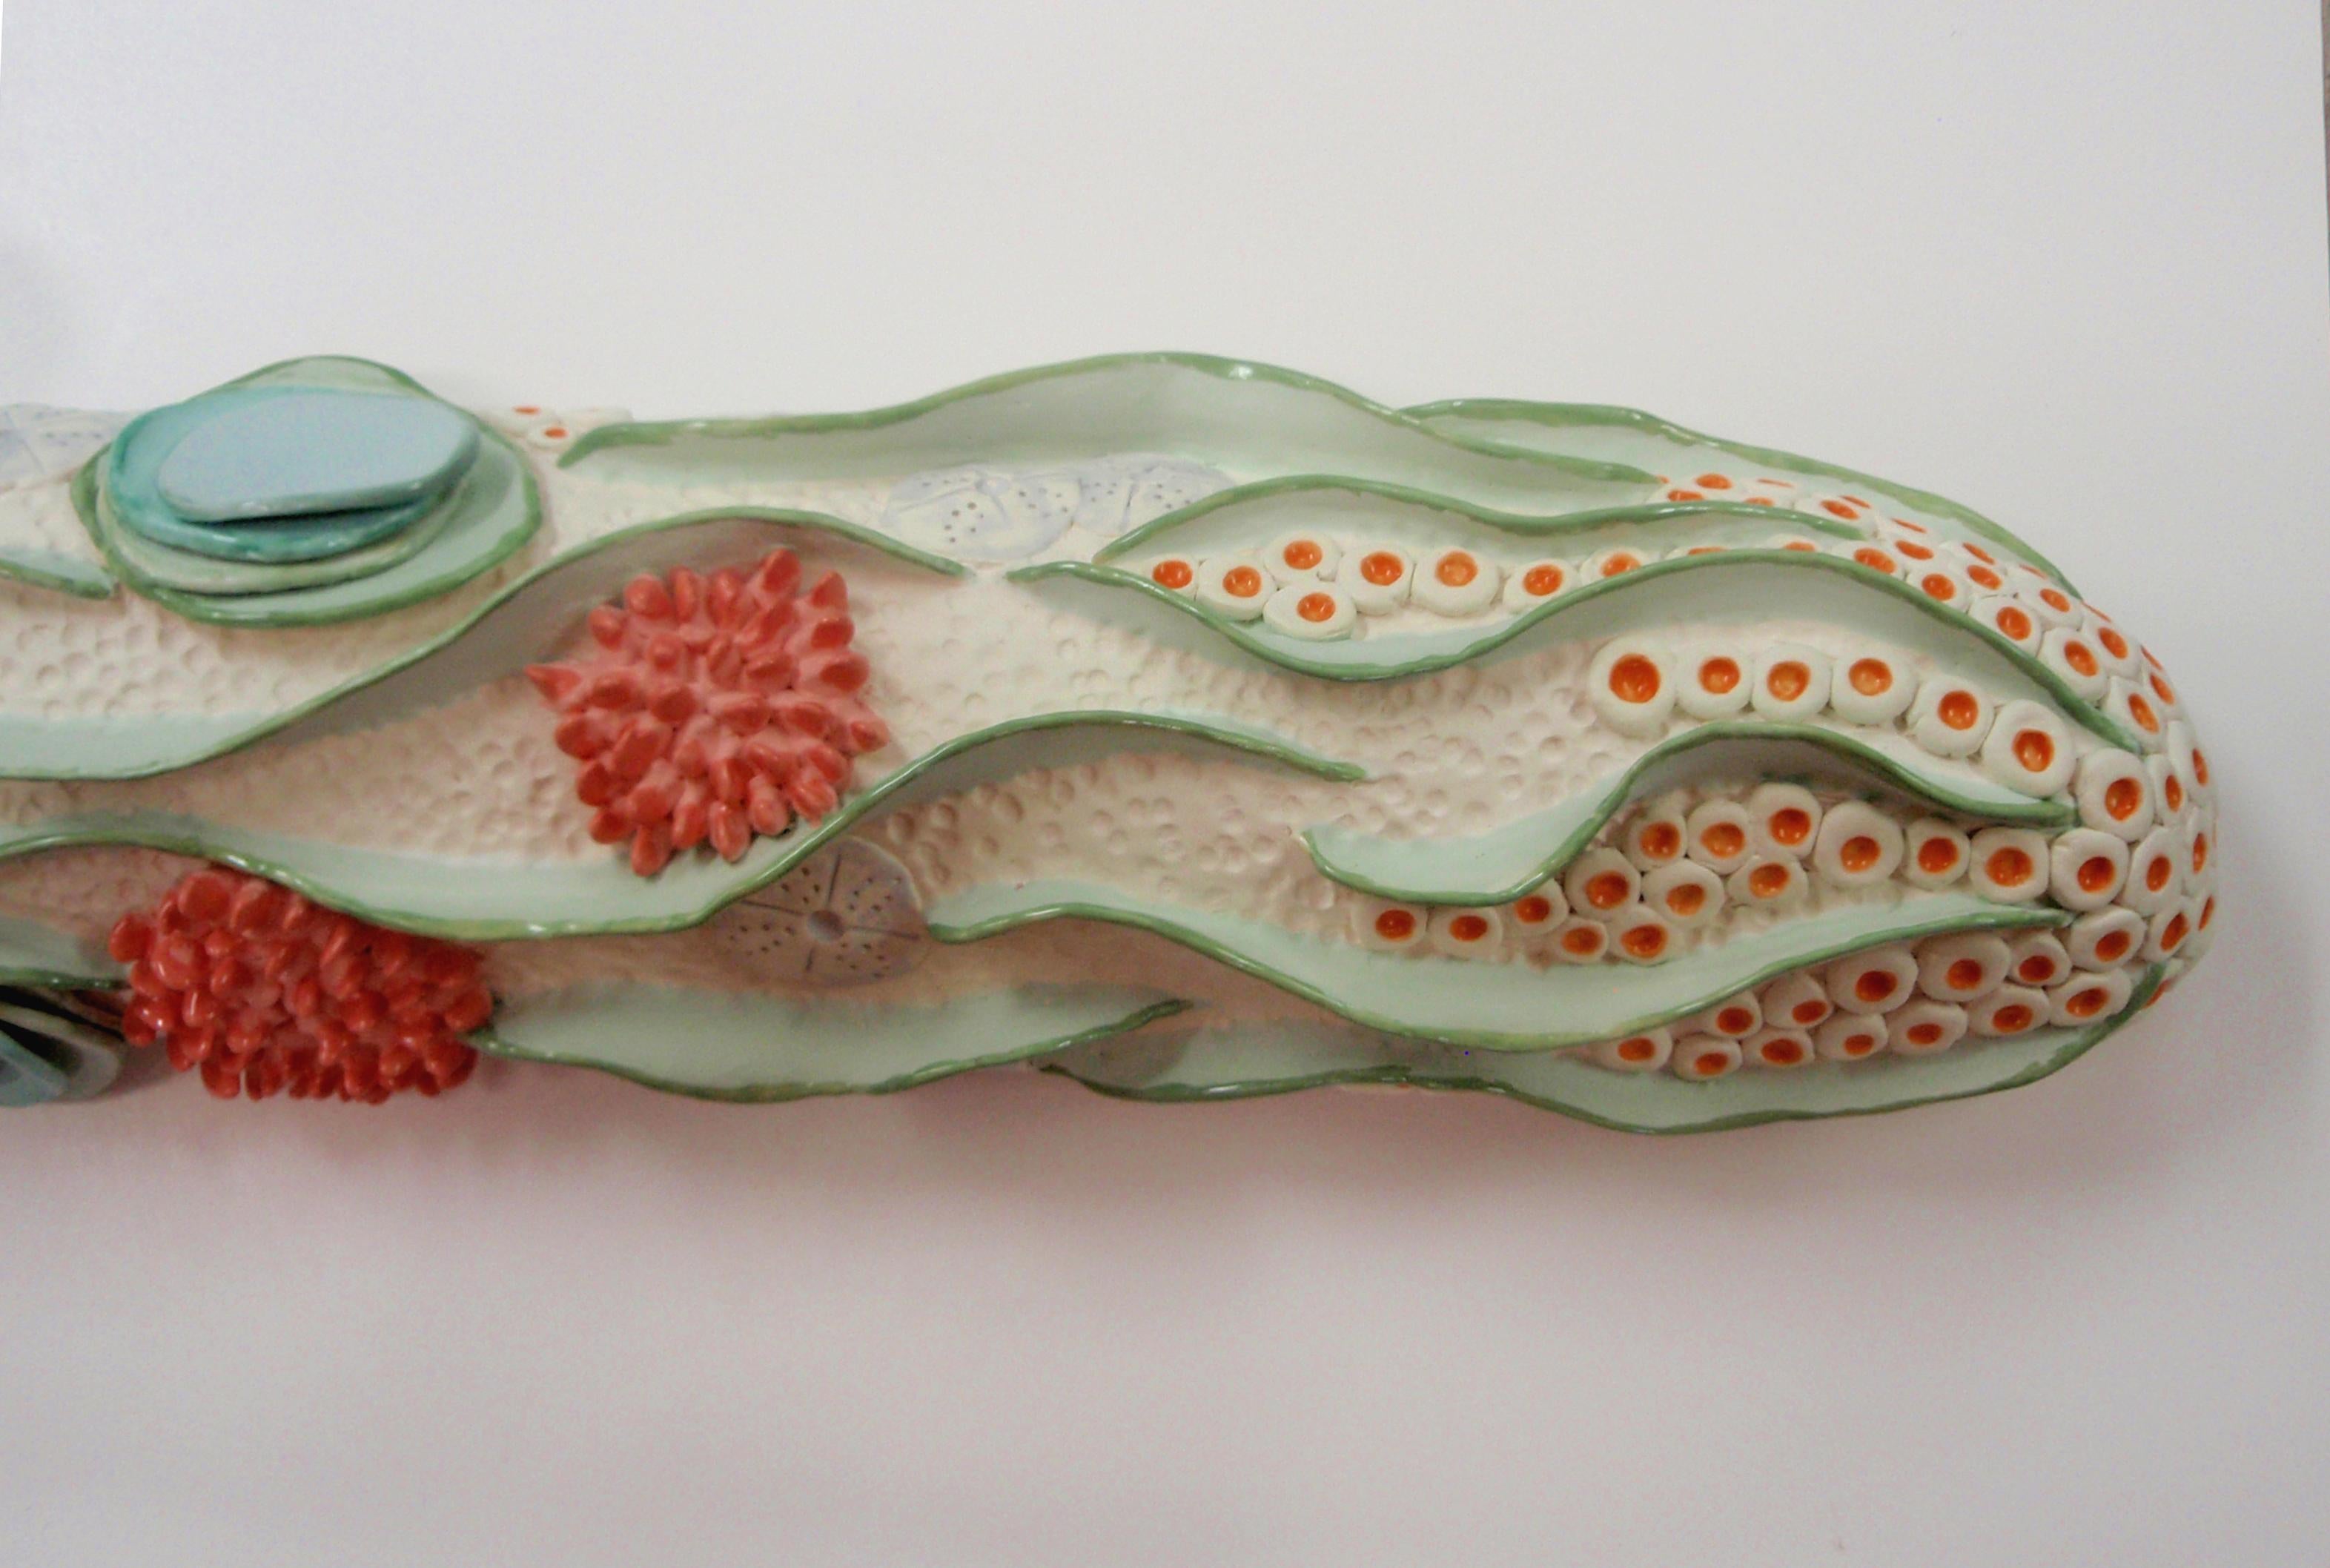 Oceanic themed coral reef inspired ceramic sculpture hanging wall piece that is, clean, minimal, white with green, coral pink, pale blue and orange. The work is created in three parts that each hang from an attached wire on a nail or hook. The three